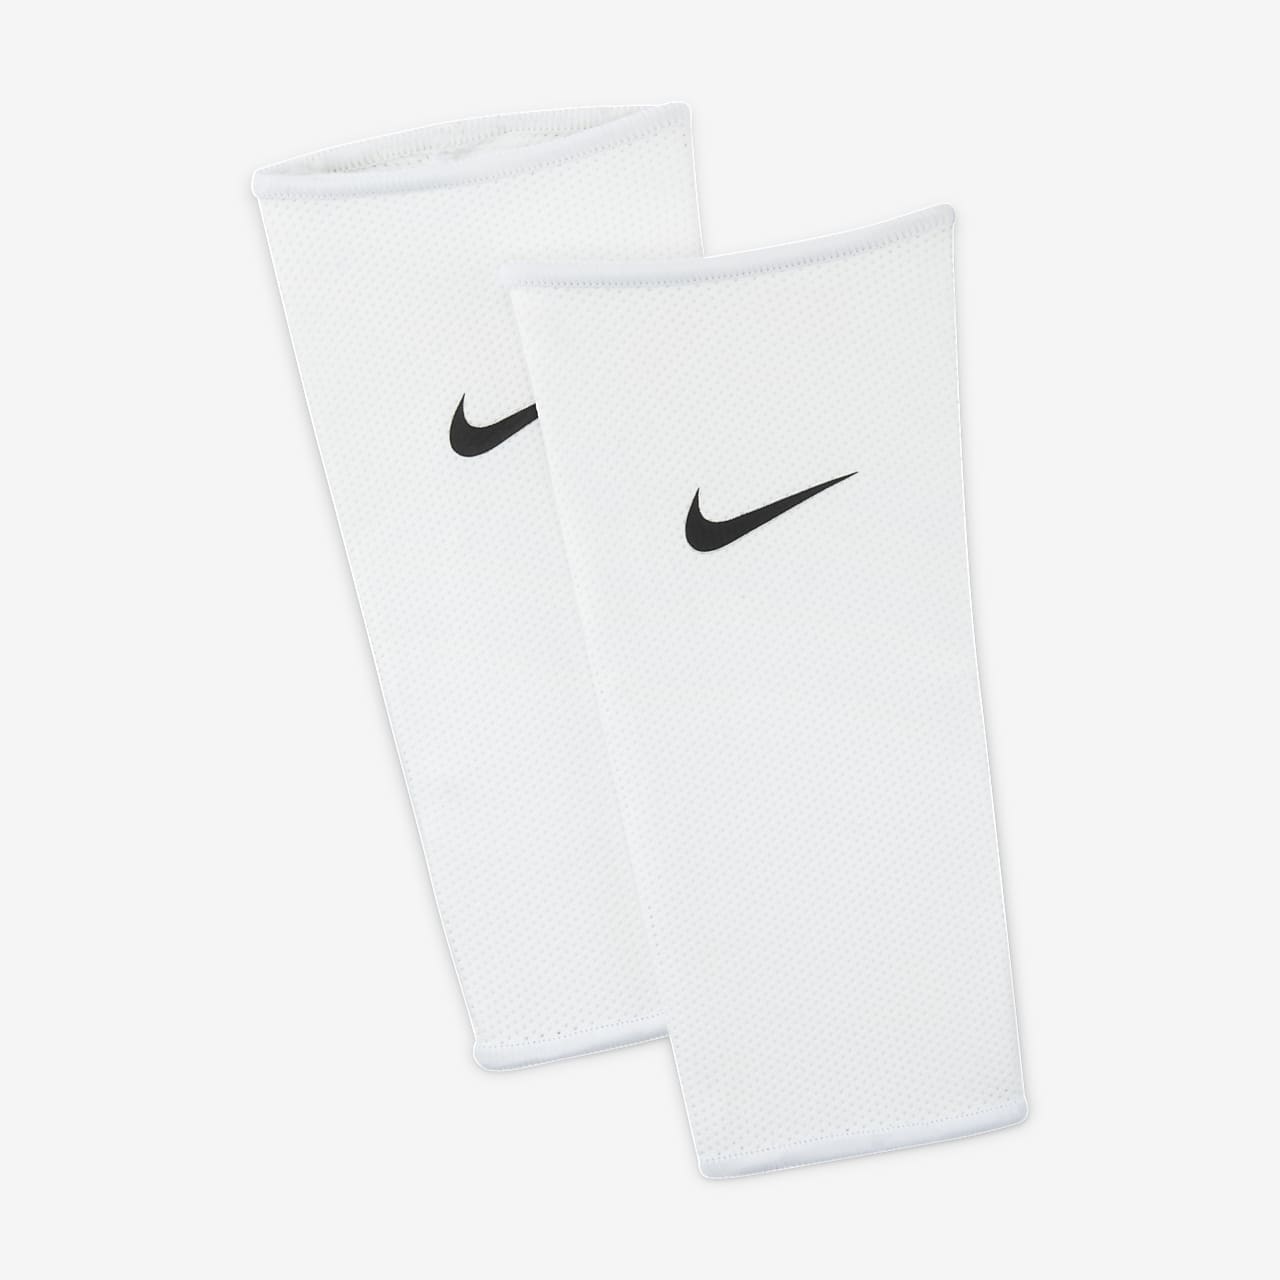 https://static.nike.com/a/images/t_PDP_1280_v1/f_auto/a1nnie7mgj52hbodqzxt/guard-lock-soccer-guard-sleeves-1-pair-ZwTAgZKe.png